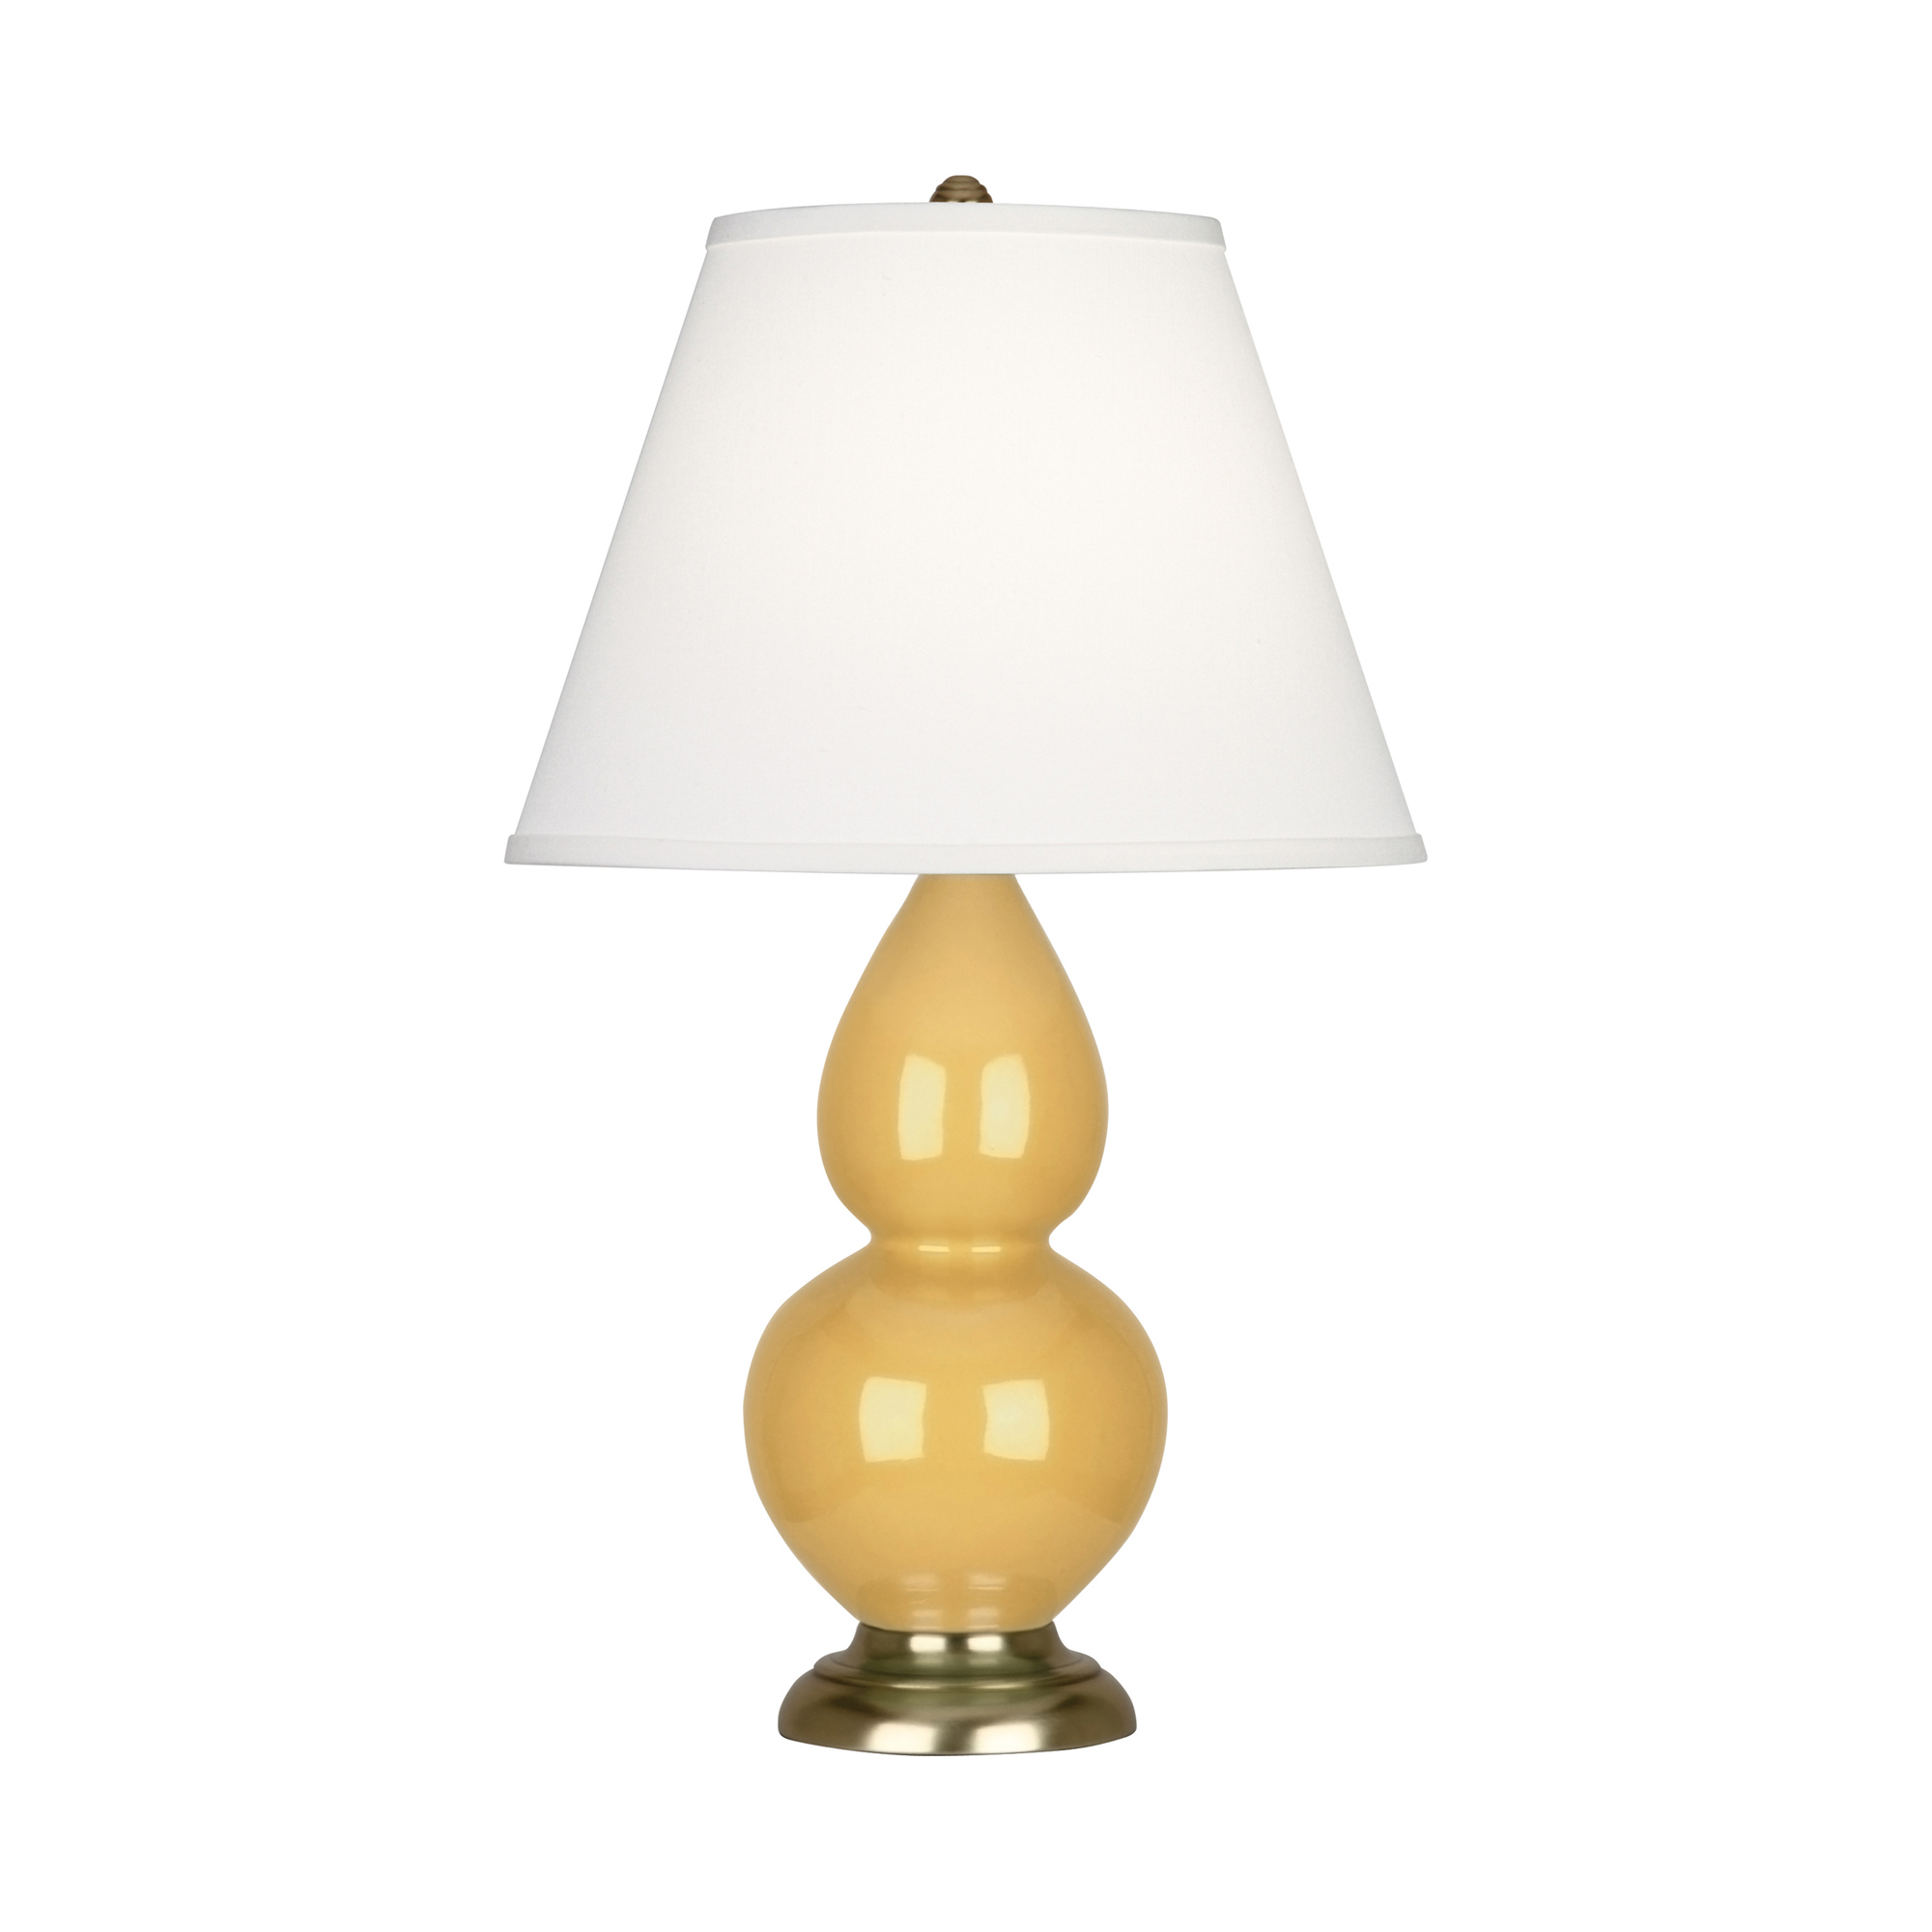 Small Double Gourd Accent Lamp Style #SU10X